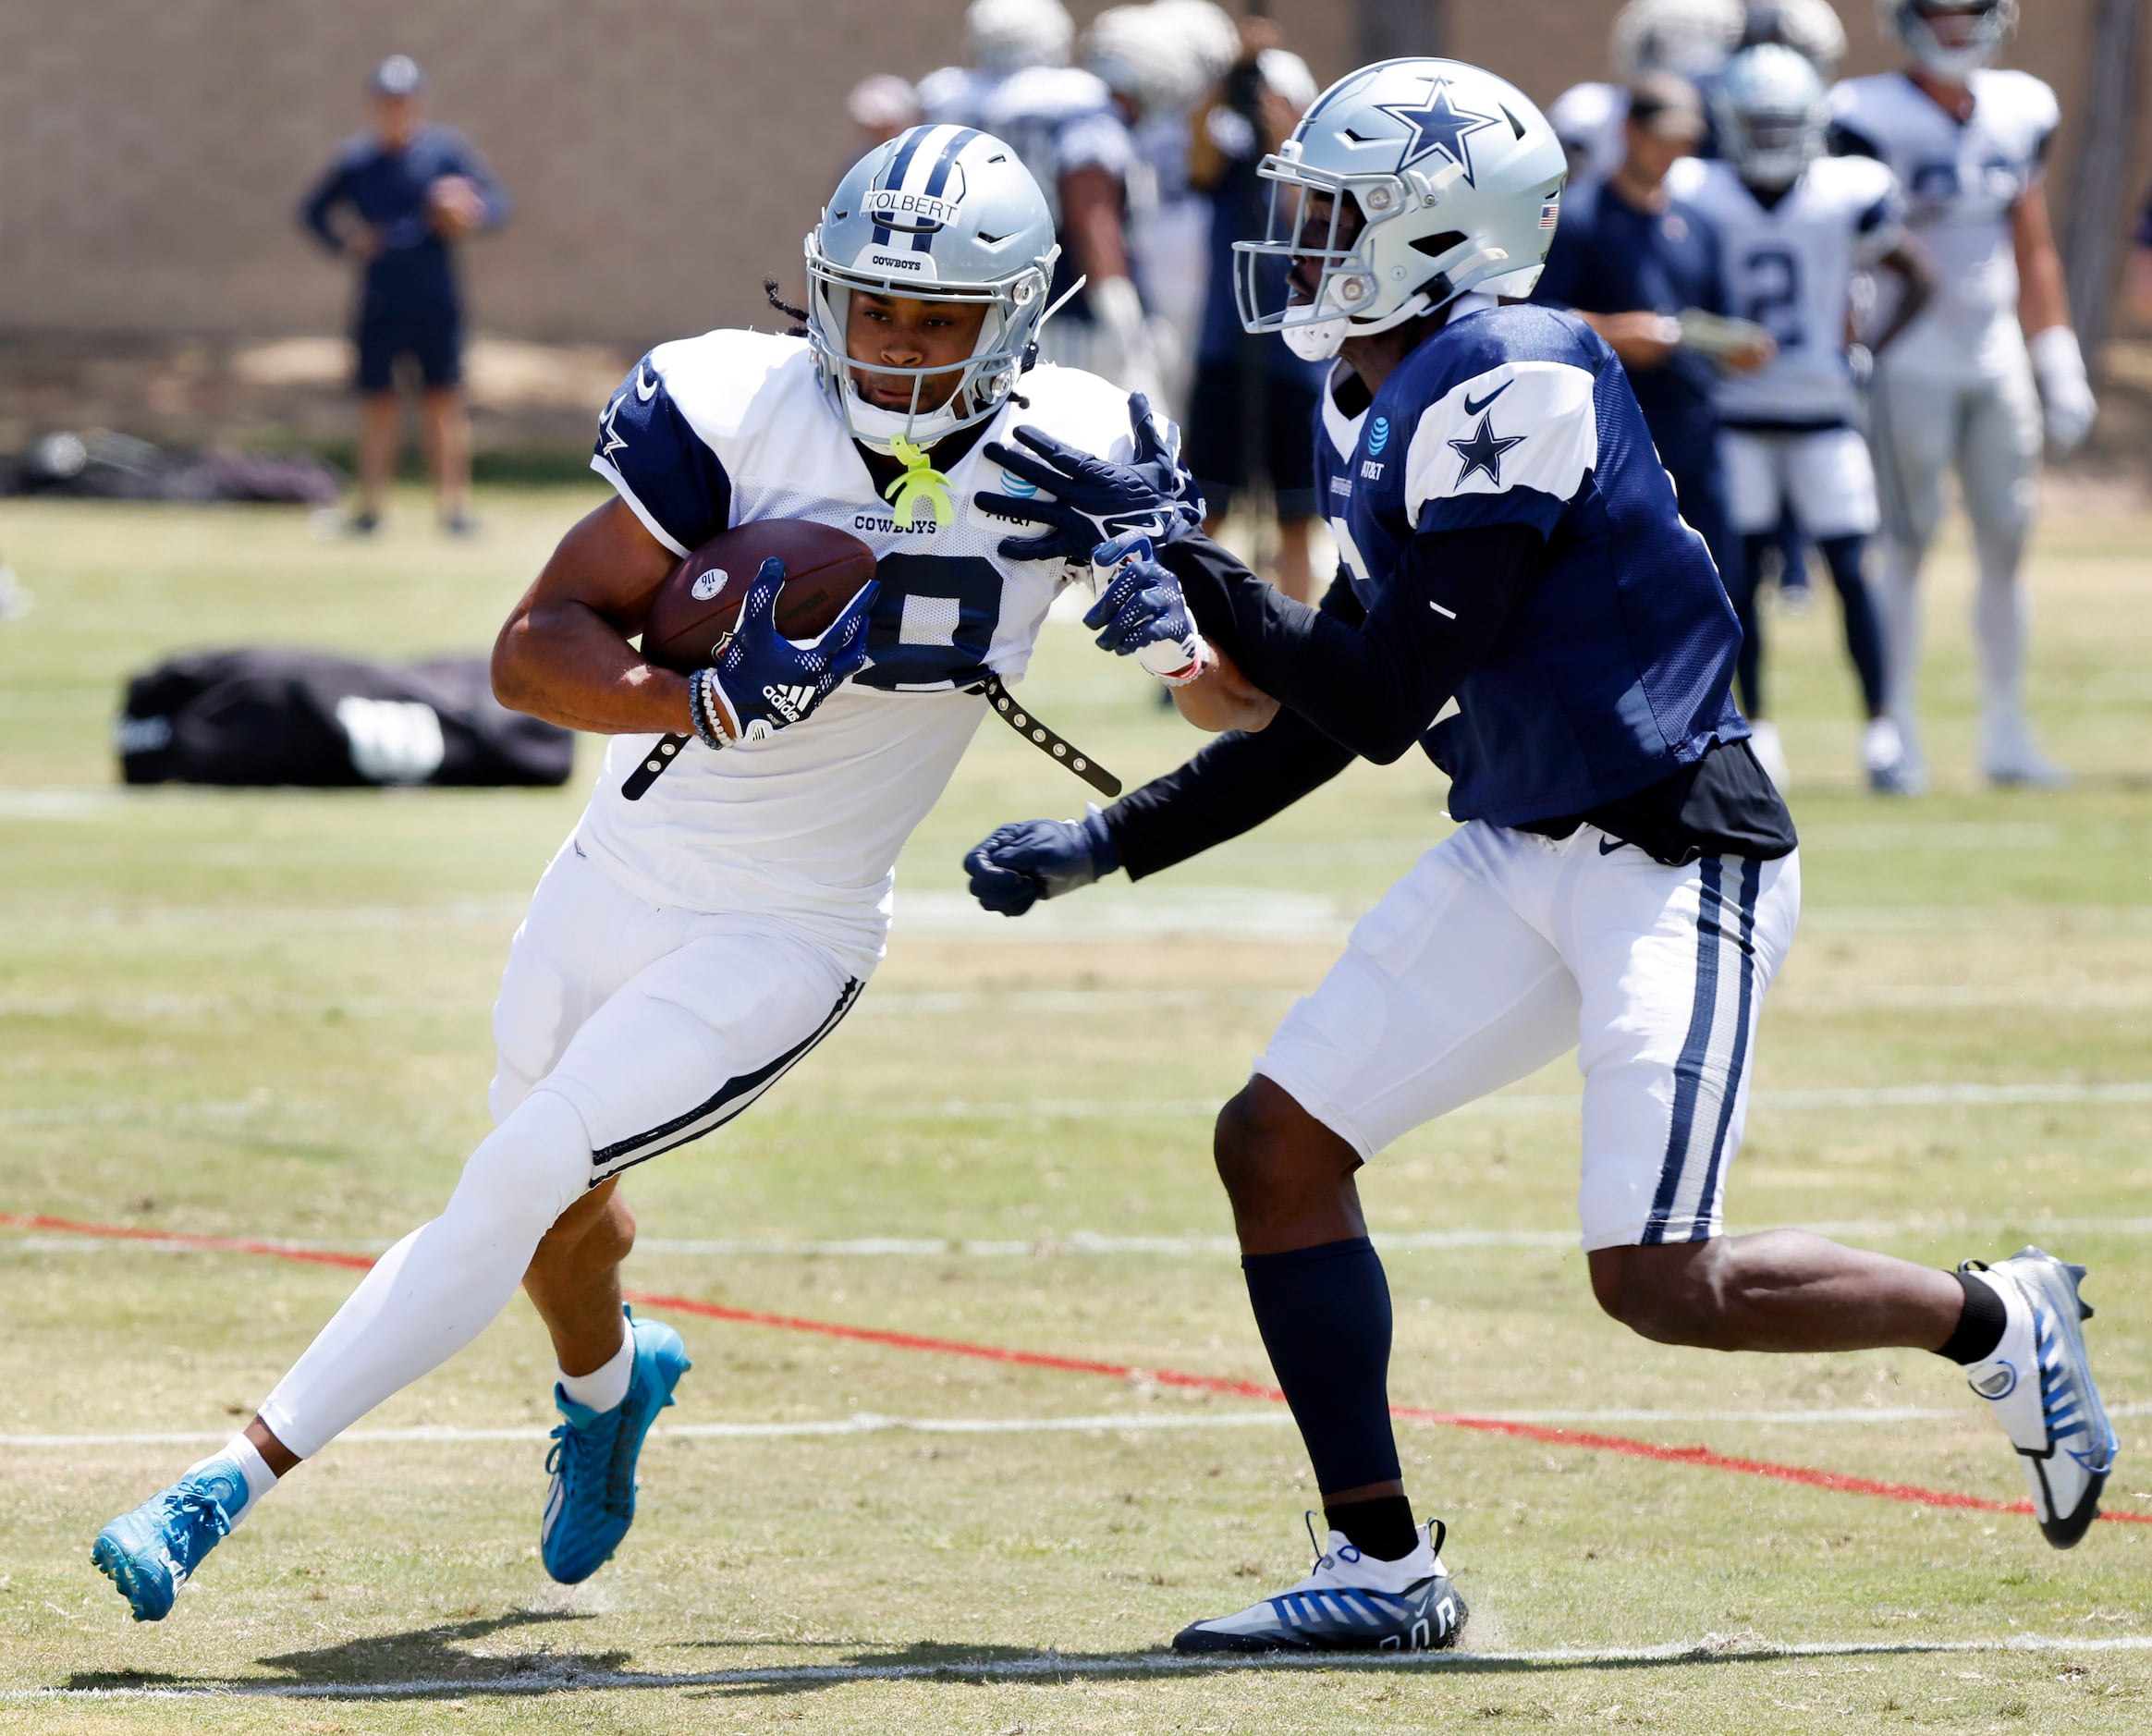 Could CeeDee Lamb be Cowboys' first triple-crown receiver